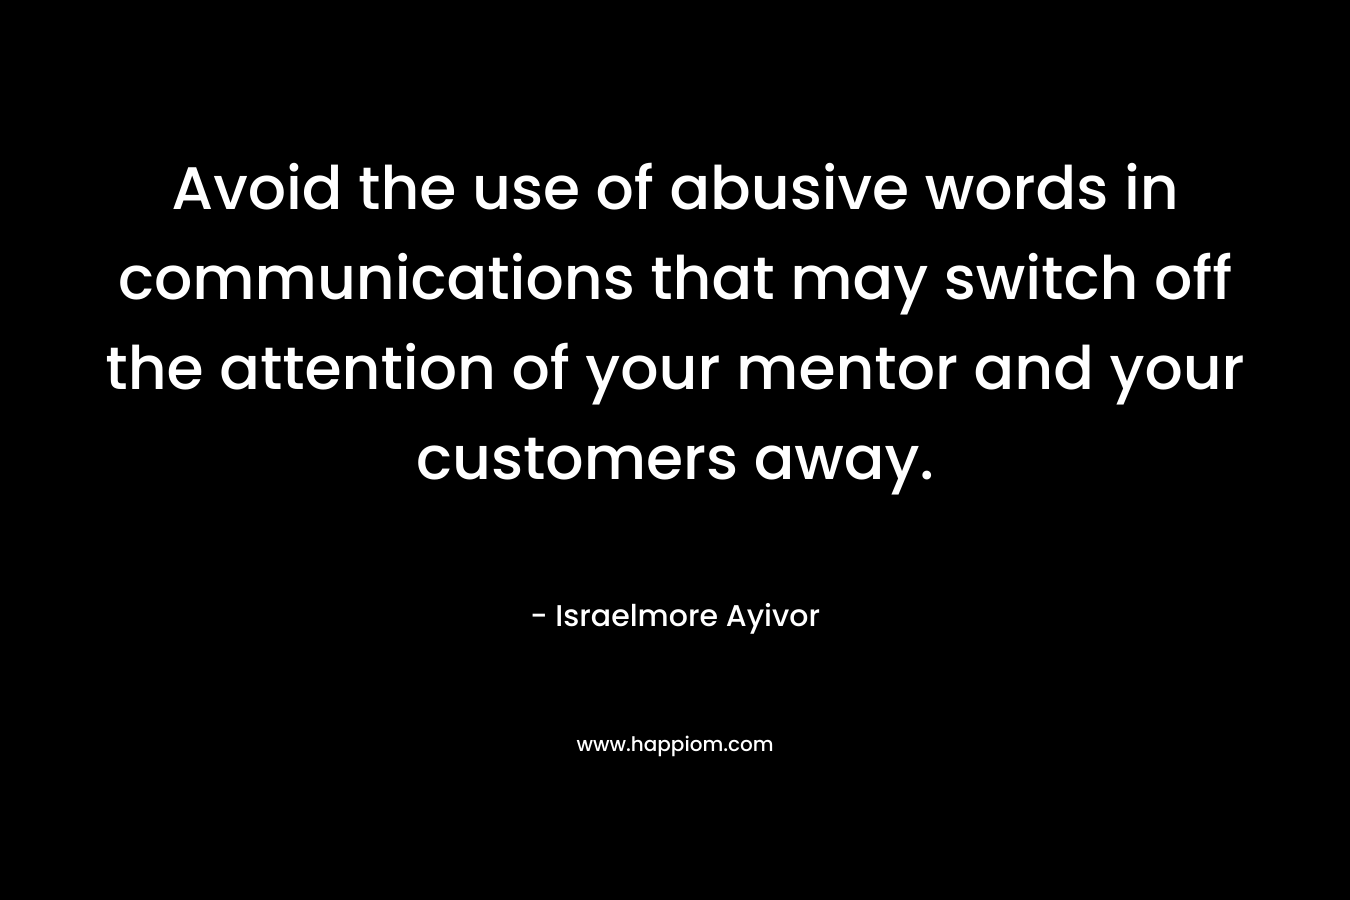 Avoid the use of abusive words in communications that may switch off the attention of your mentor and your customers away. – Israelmore Ayivor